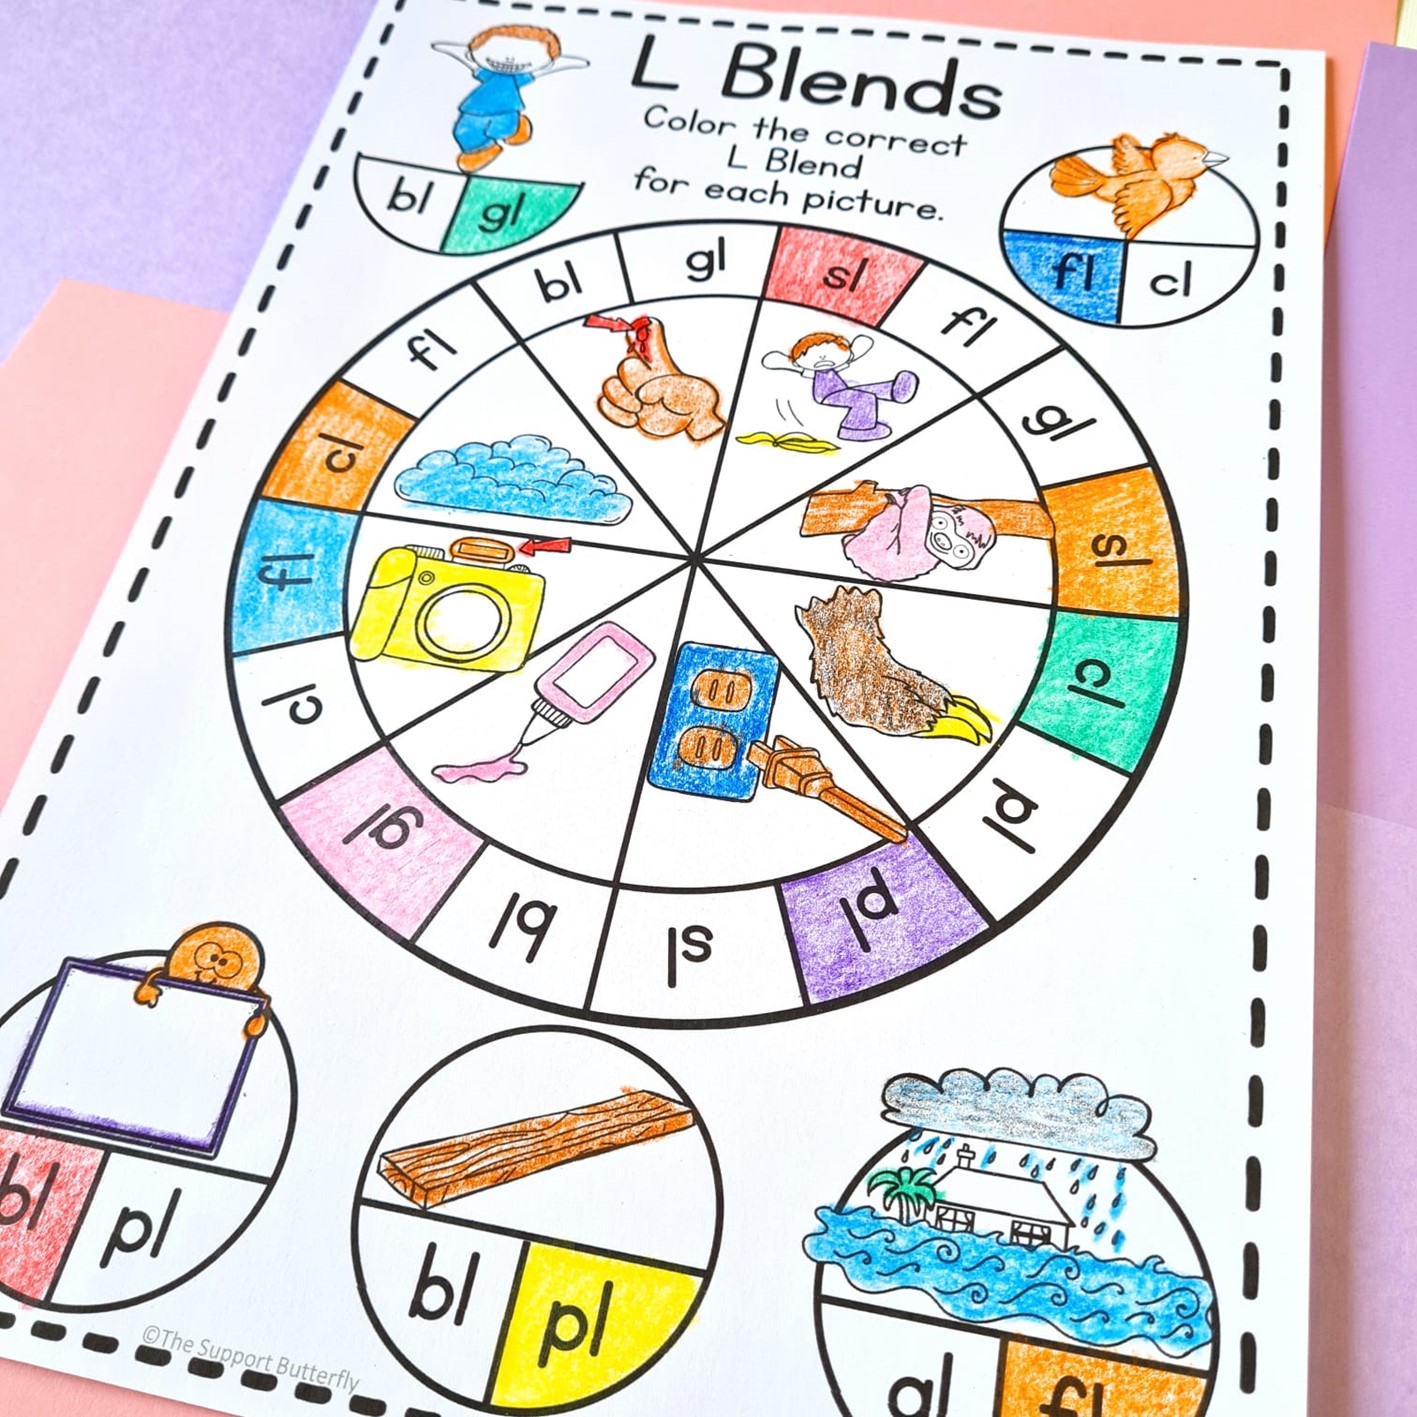 S l r initial blends activities and worksheets made by teachers